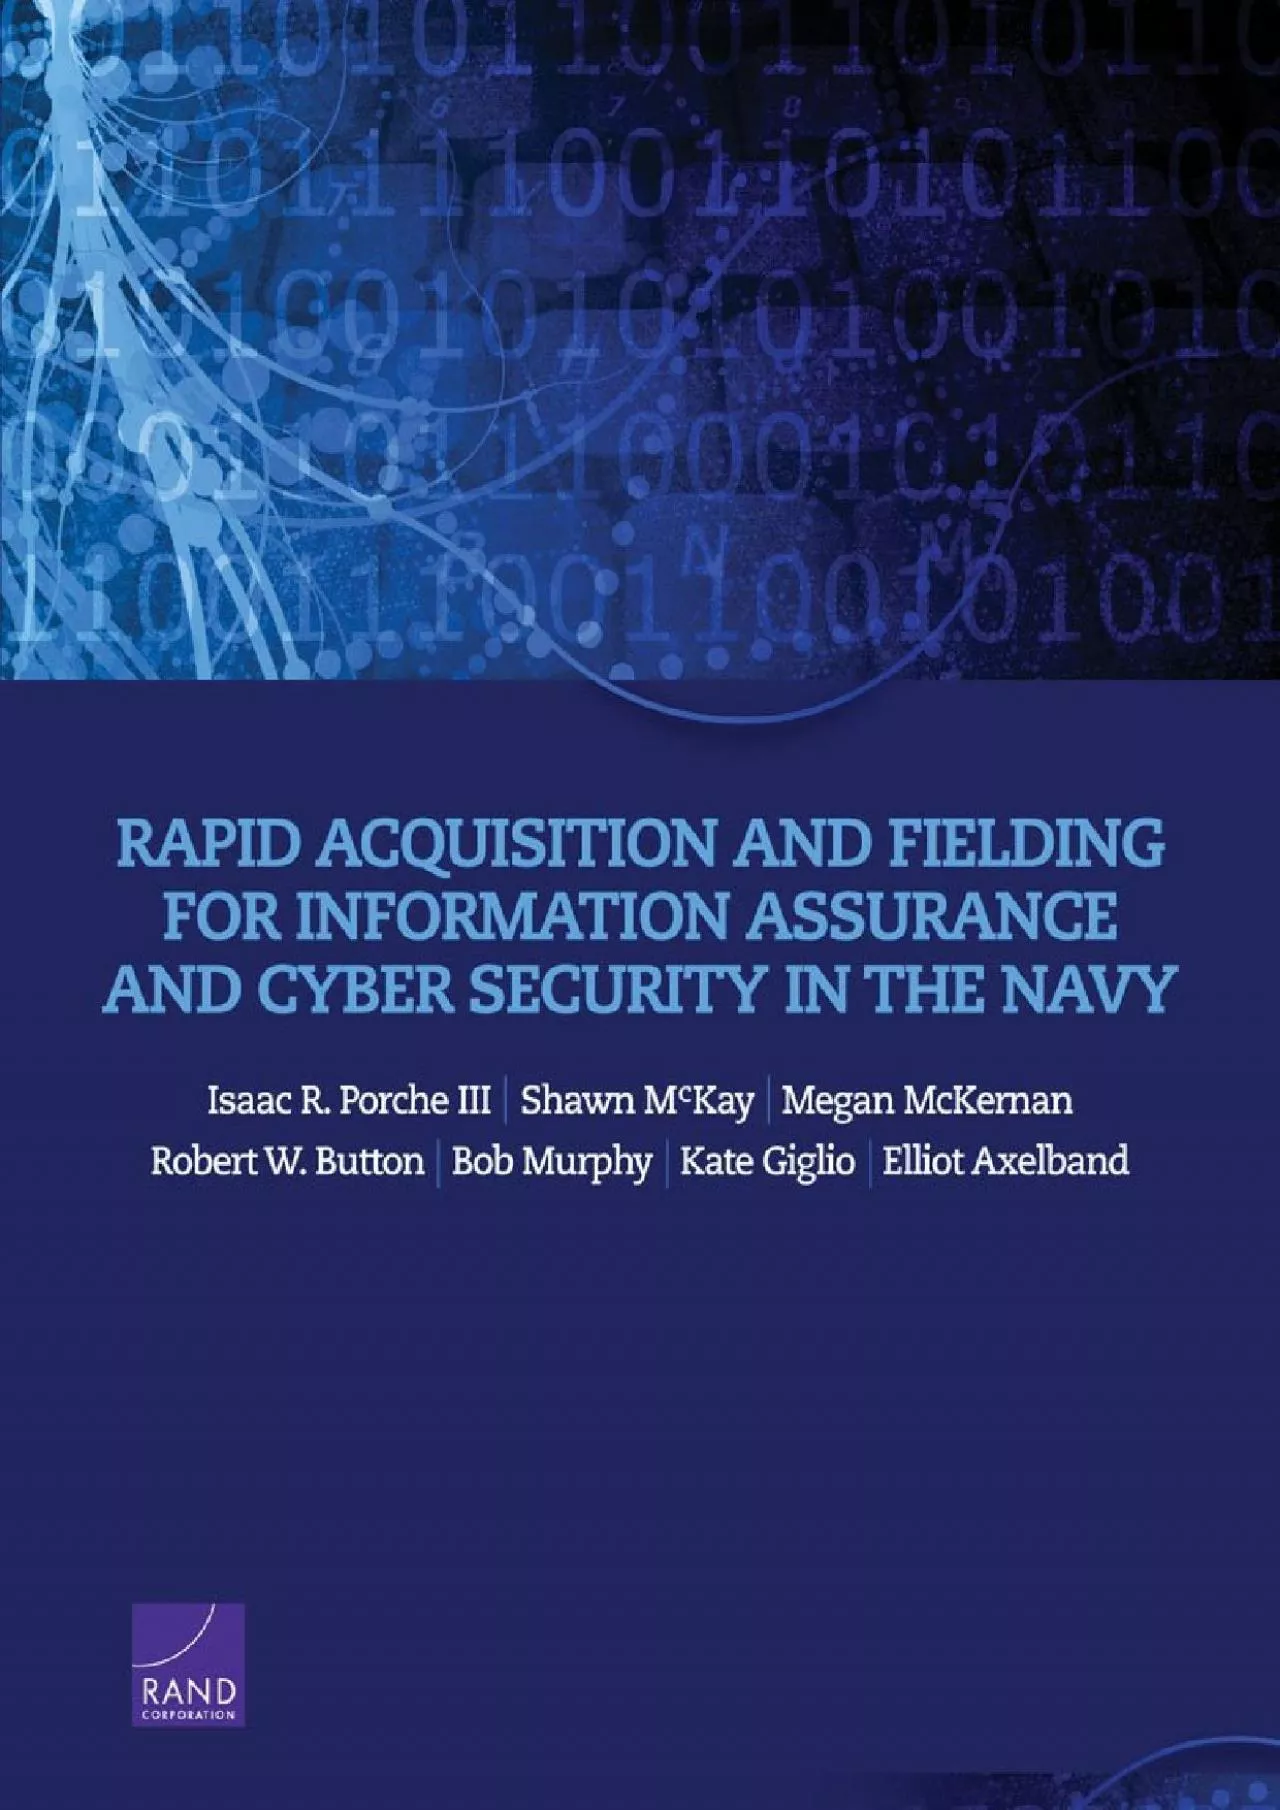 [READ]-Rapid Acquisition and Fielding for Information Assurance and Cyber Security in